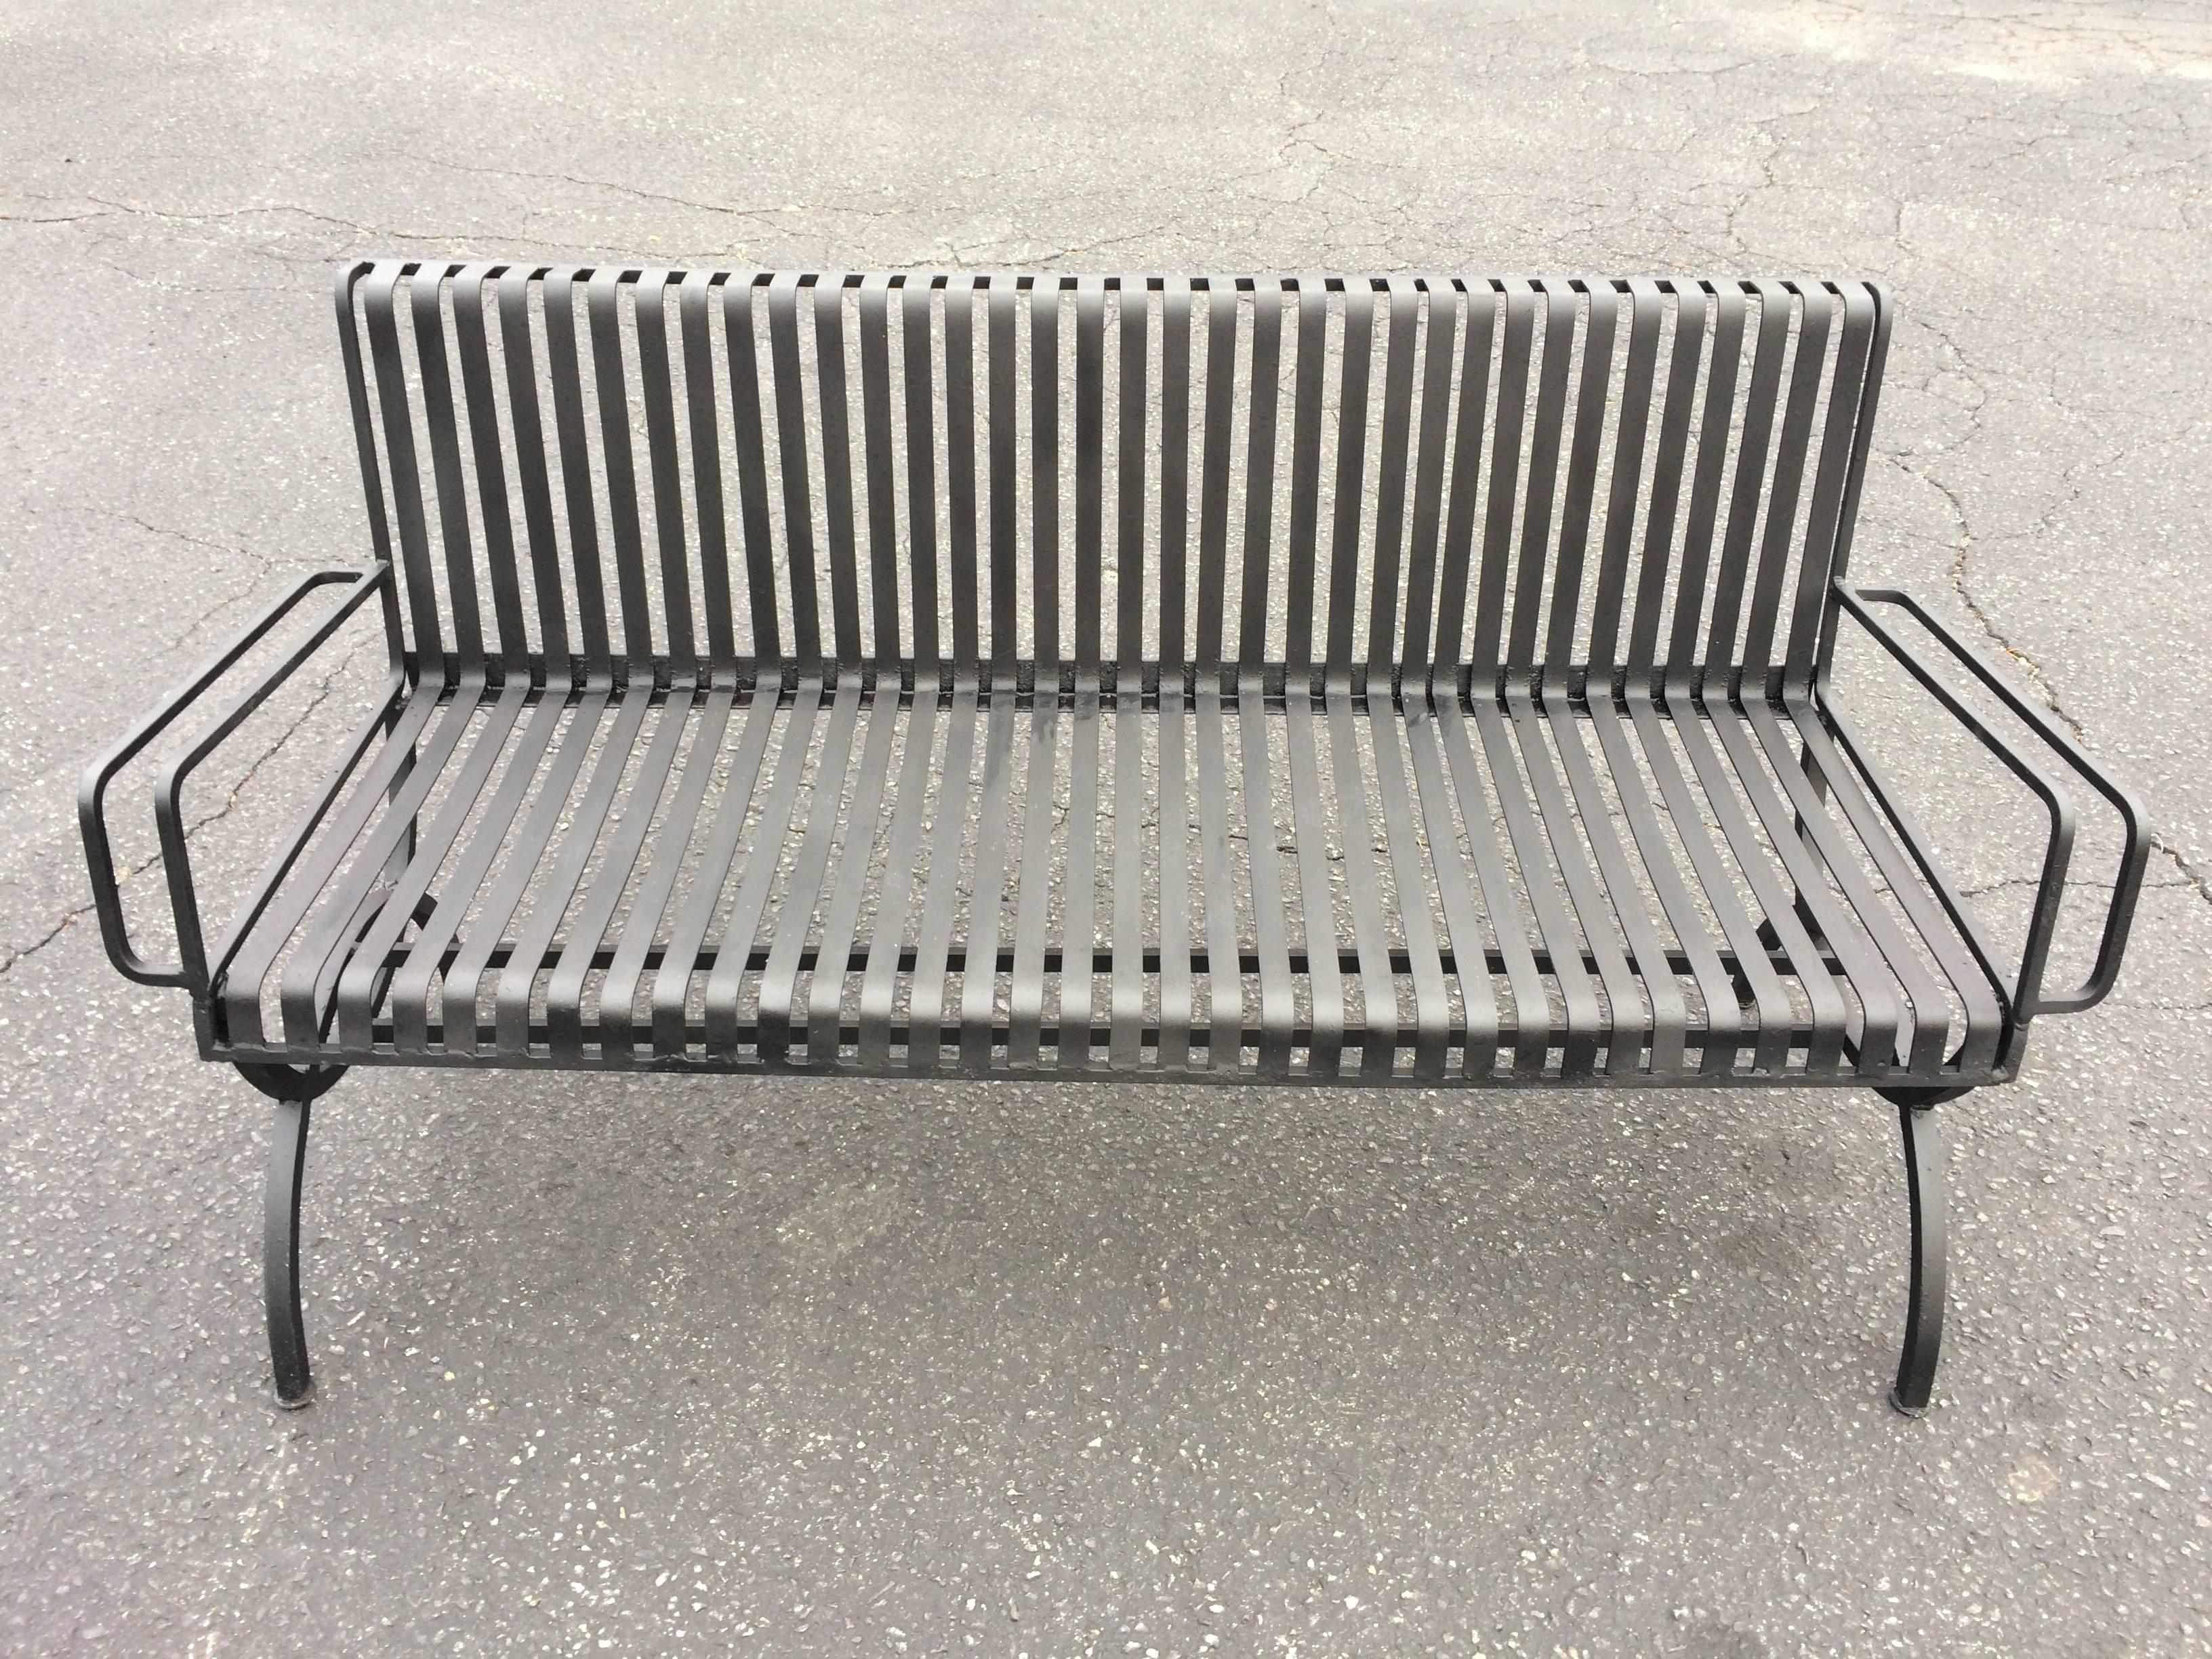 Rare handmade Mid-Century Steel bench. Great lines. A perfect accent piece to a garden or patio.Fully restored.Gray black finish